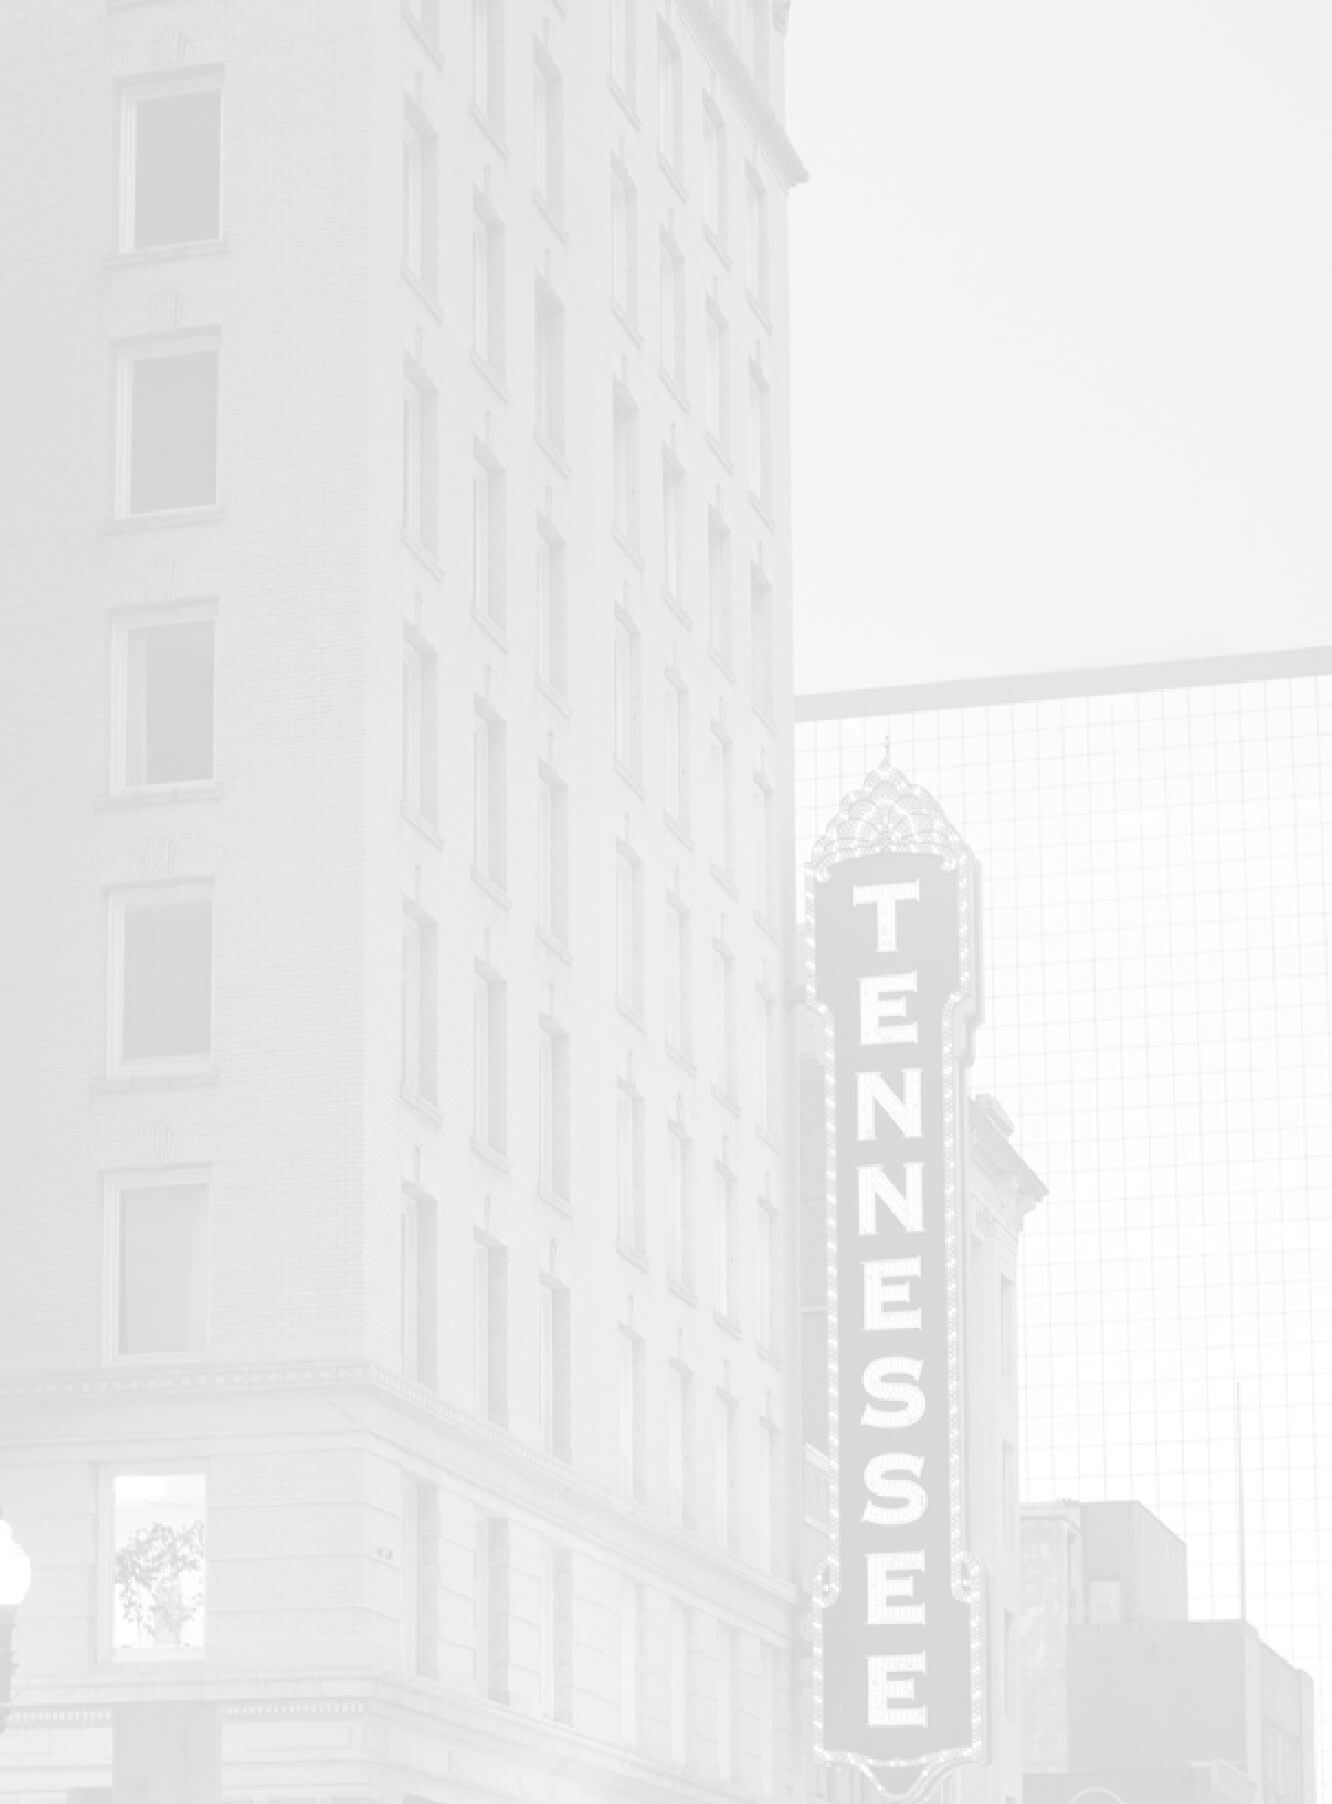 image of the Tennessee Theater with the lights on the sign lit up